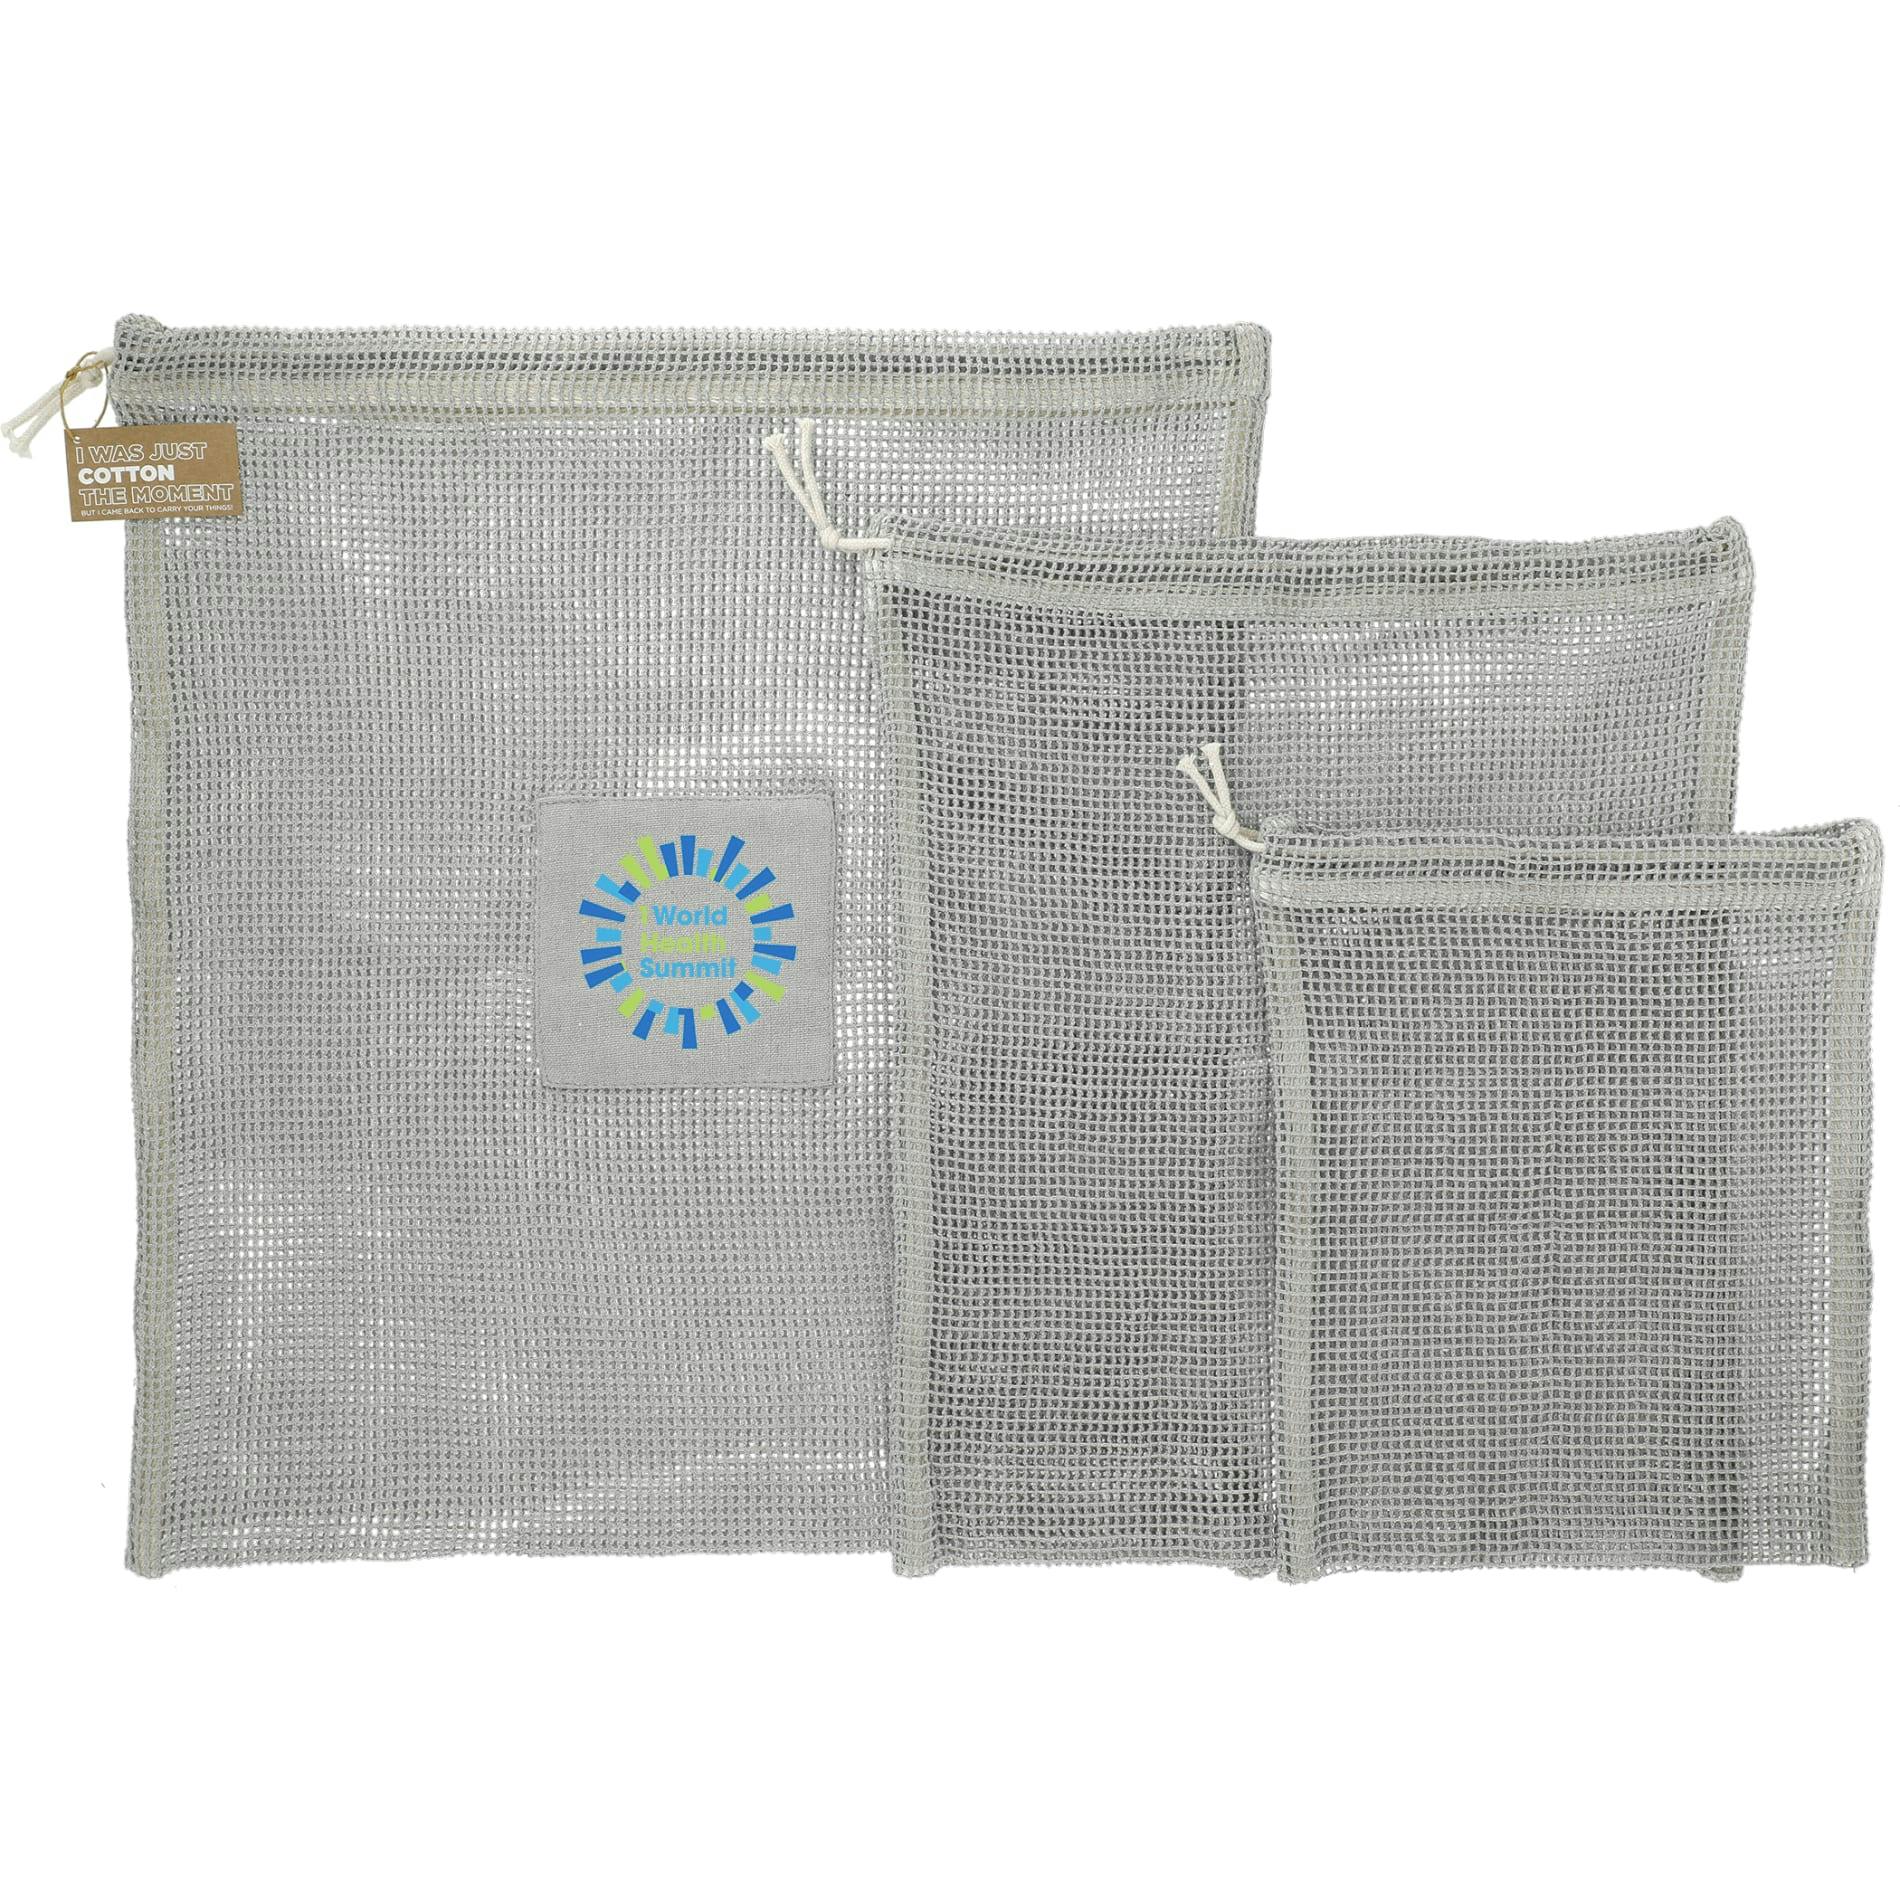 Recycled Cotton Mesh Cinch Pouch Set - additional Image 1